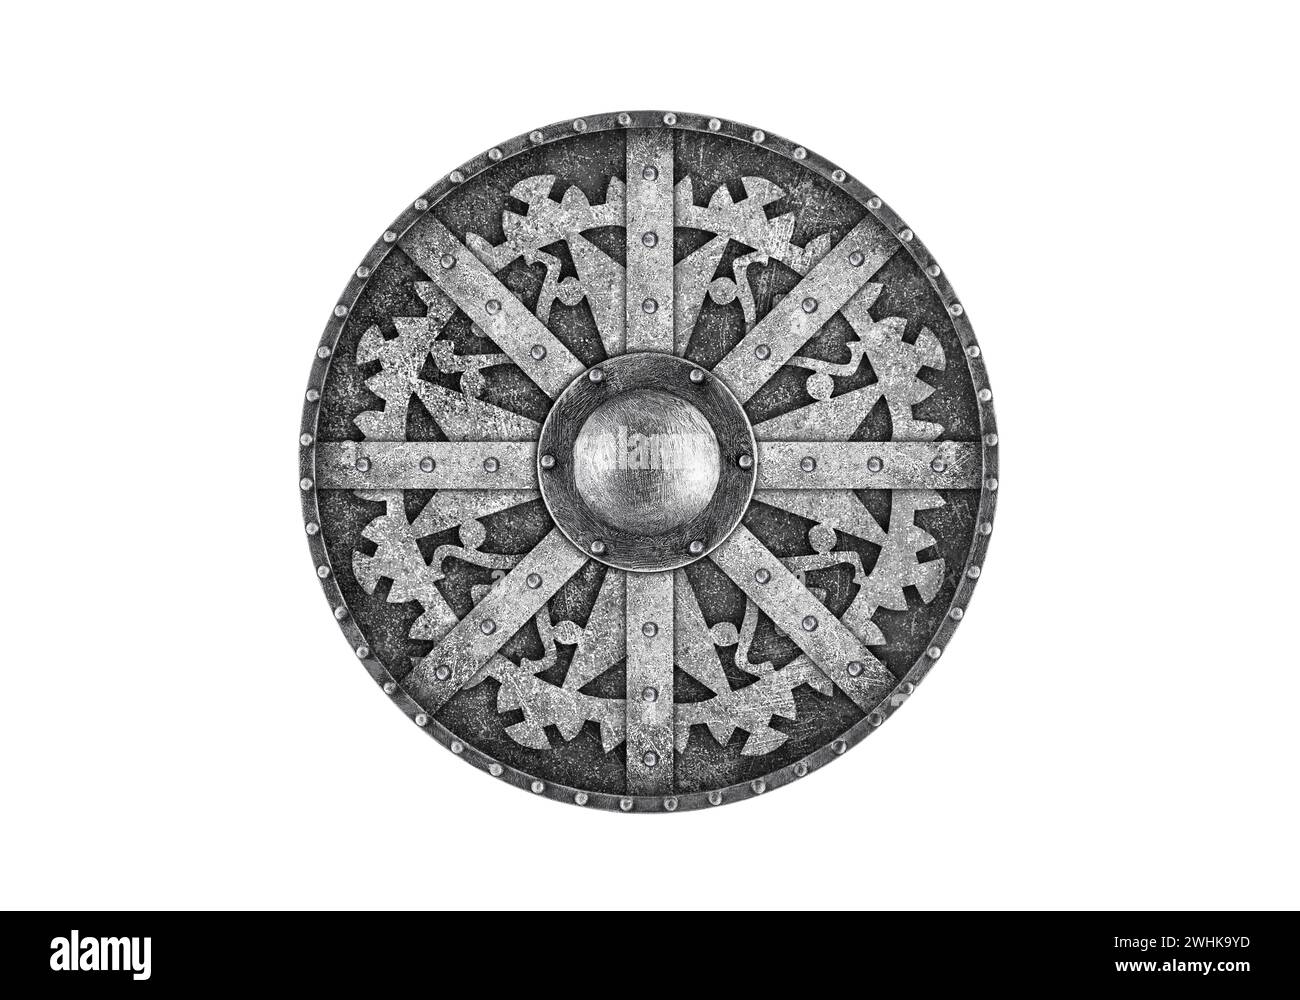 Old decorated metal round shield isolated on white background Stock Photo